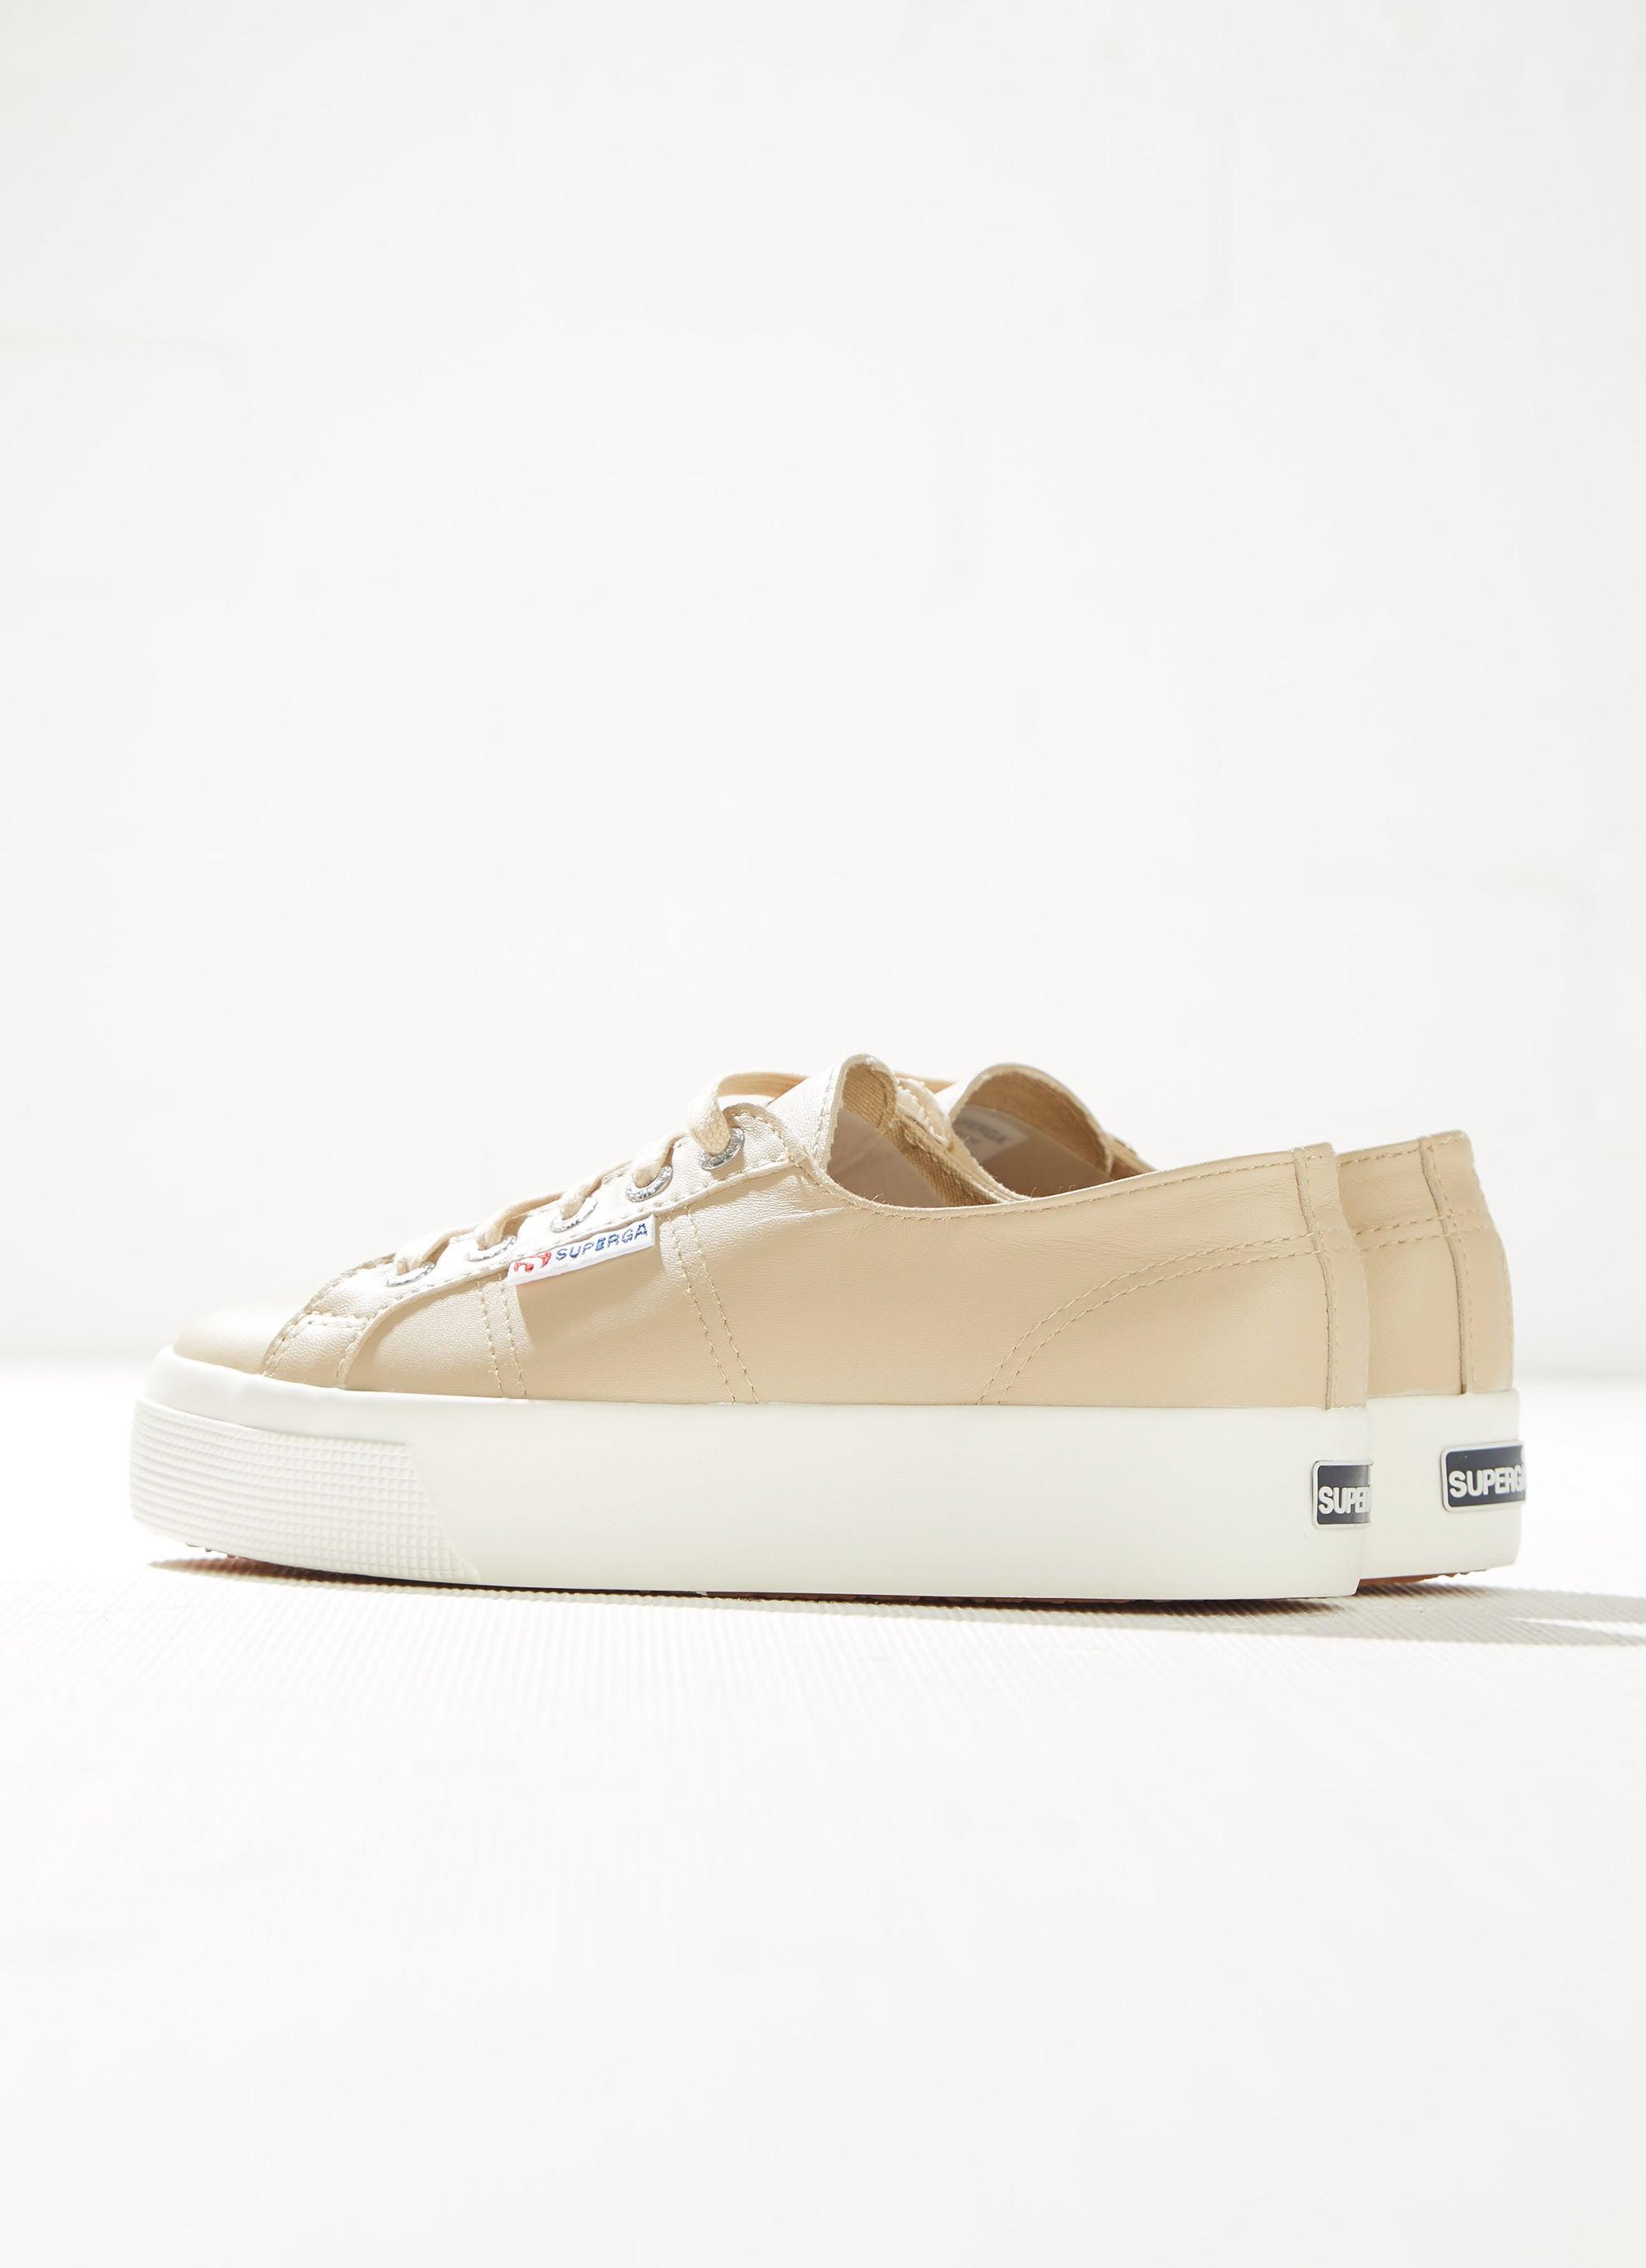 Superga Leather 2730 Nappa Sneaker in Natural | Lyst